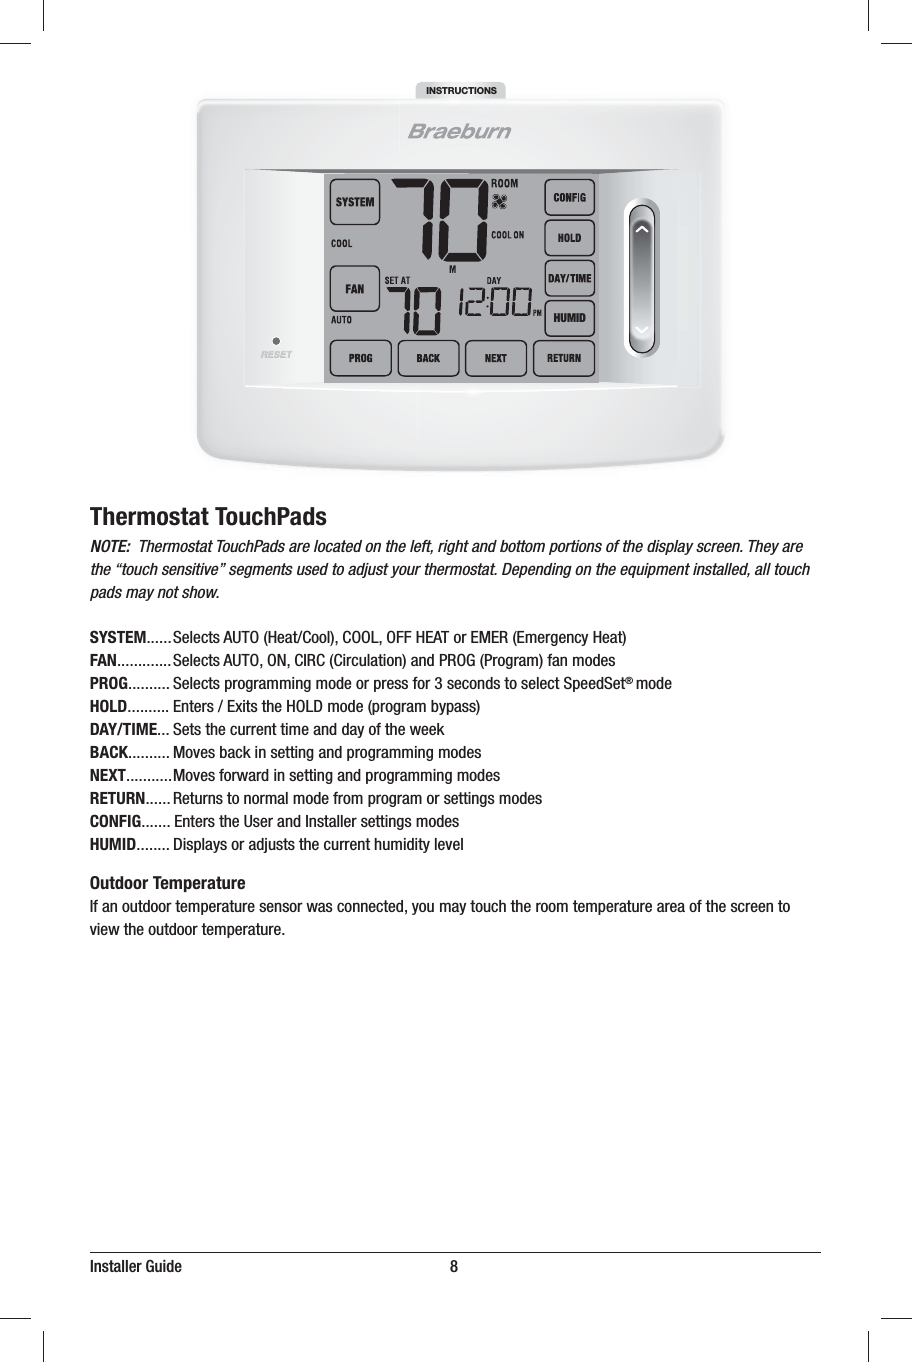 Installer Guide                                                                   8Thermostat TouchPadsNOTE:  Thermostat TouchPads are located on the left, right and bottom portions of the display screen. They are the “touch sensitive” segments used to adjust your thermostat. Depending on the equipment installed, all touch pads may not show.SYSTEM4FMFDUT&quot;650)FBU$PPM$00-0&apos;&apos;)&amp;&quot;5PS&amp;.&amp;3&amp;NFSHFODZ)FBUFAN4FMFDUT&quot;6500/$*3$$JSDVMBUJPOBOE130(1SPHSBNGBONPEFTPROG4FMFDUTQSPHSBNNJOHNPEFPSQSFTTGPSTFDPOETUPTFMFDU4QFFE4FU® NPEFHOLD&amp;OUFST&amp;YJUTUIF)0-%NPEFQSPHSBNCZQBTTDAY/TIME4FUTUIFDVSSFOUUJNFBOEEBZPGUIFXFFLBACK.PWFTCBDLJOTFUUJOHBOEQSPHSBNNJOHNPEFTNEXT.PWFTGPSXBSEJOTFUUJOHBOEQSPHSBNNJOHNPEFTRETURN3FUVSOTUPOPSNBMNPEFGSPNQSPHSBNPSTFUUJOHTNPEFTCONFIG&amp;OUFSTUIF6TFSBOE*OTUBMMFSTFUUJOHTNPEFTHUMID%JTQMBZTPSBEKVTUTUIFDVSSFOUIVNJEJUZMFWFMOutdoor Temperature*GBOPVUEPPSUFNQFSBUVSFTFOTPSXBTDPOOFDUFEZPVNBZUPVDIUIFSPPNUFNQFSBUVSFBSFBPGUIFTDSFFOUPWJFXUIFPVUEPPSUFNQFSBUVSFINSTRUCTIONSHUMID